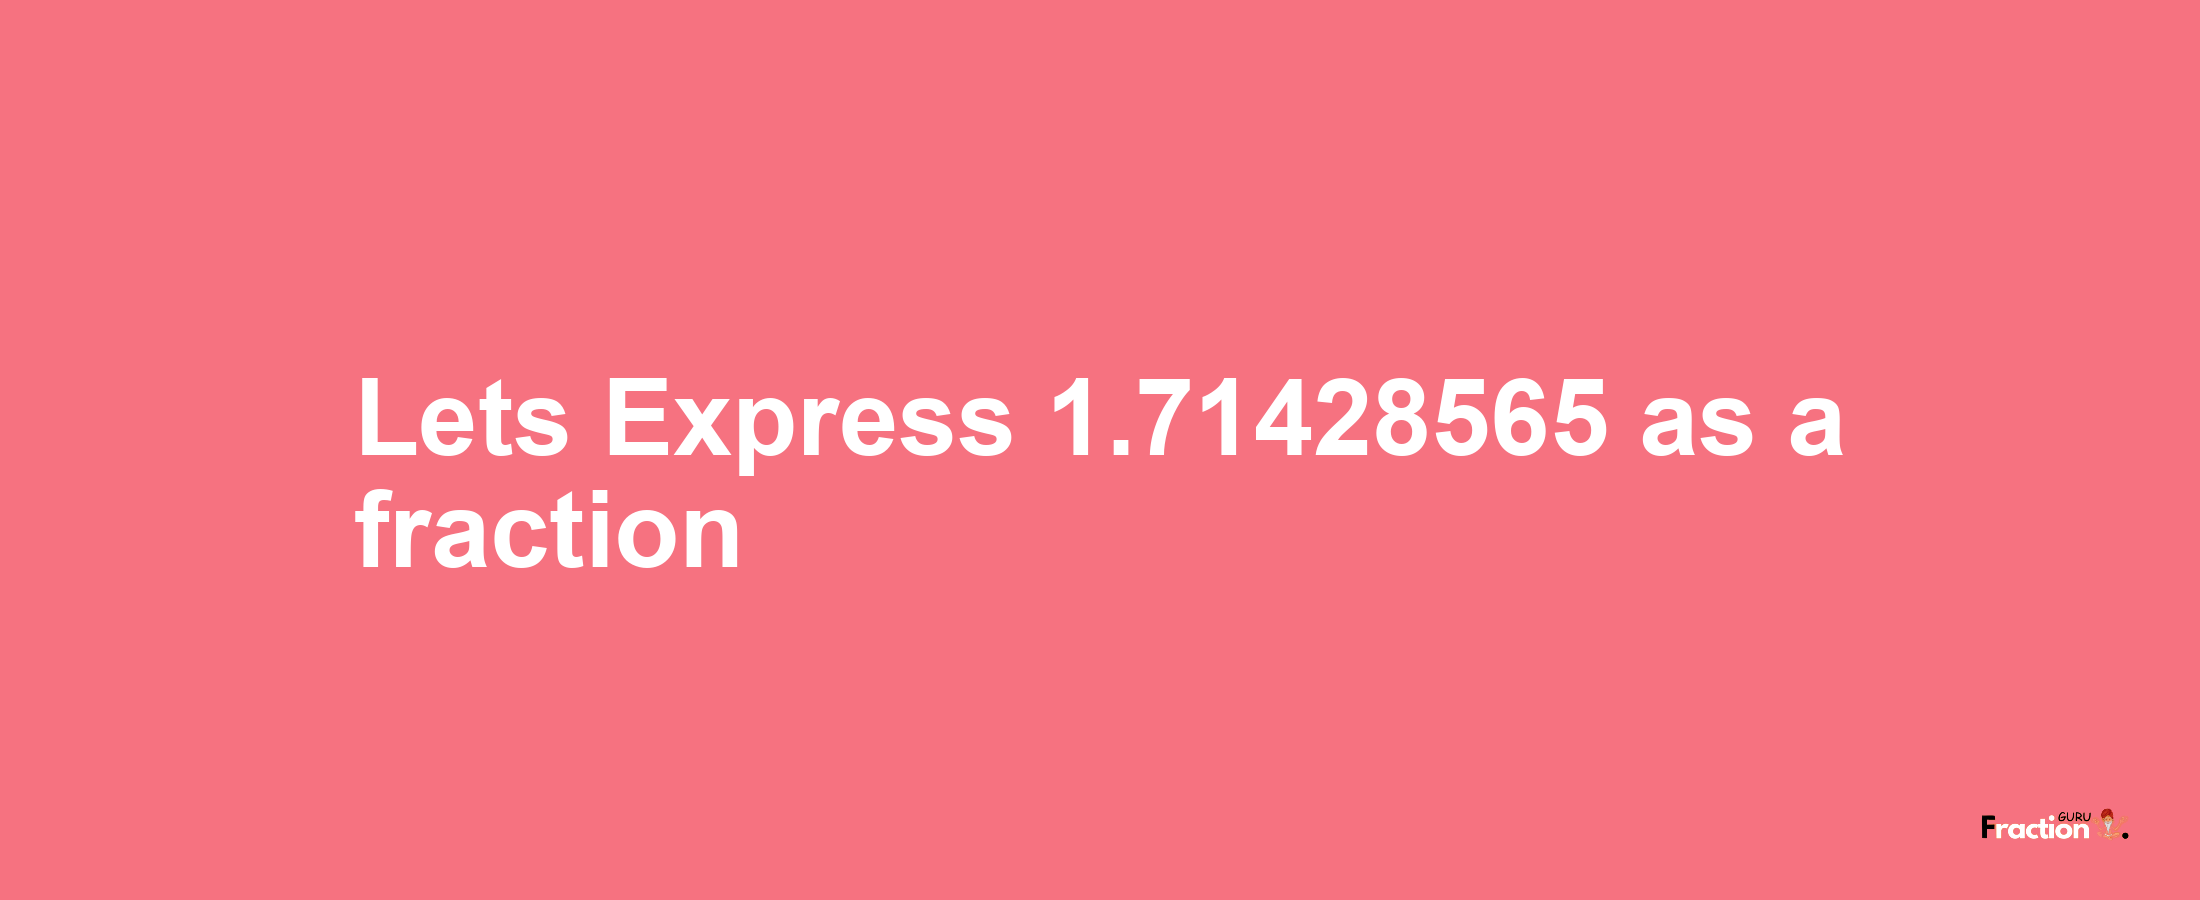 Lets Express 1.71428565 as afraction